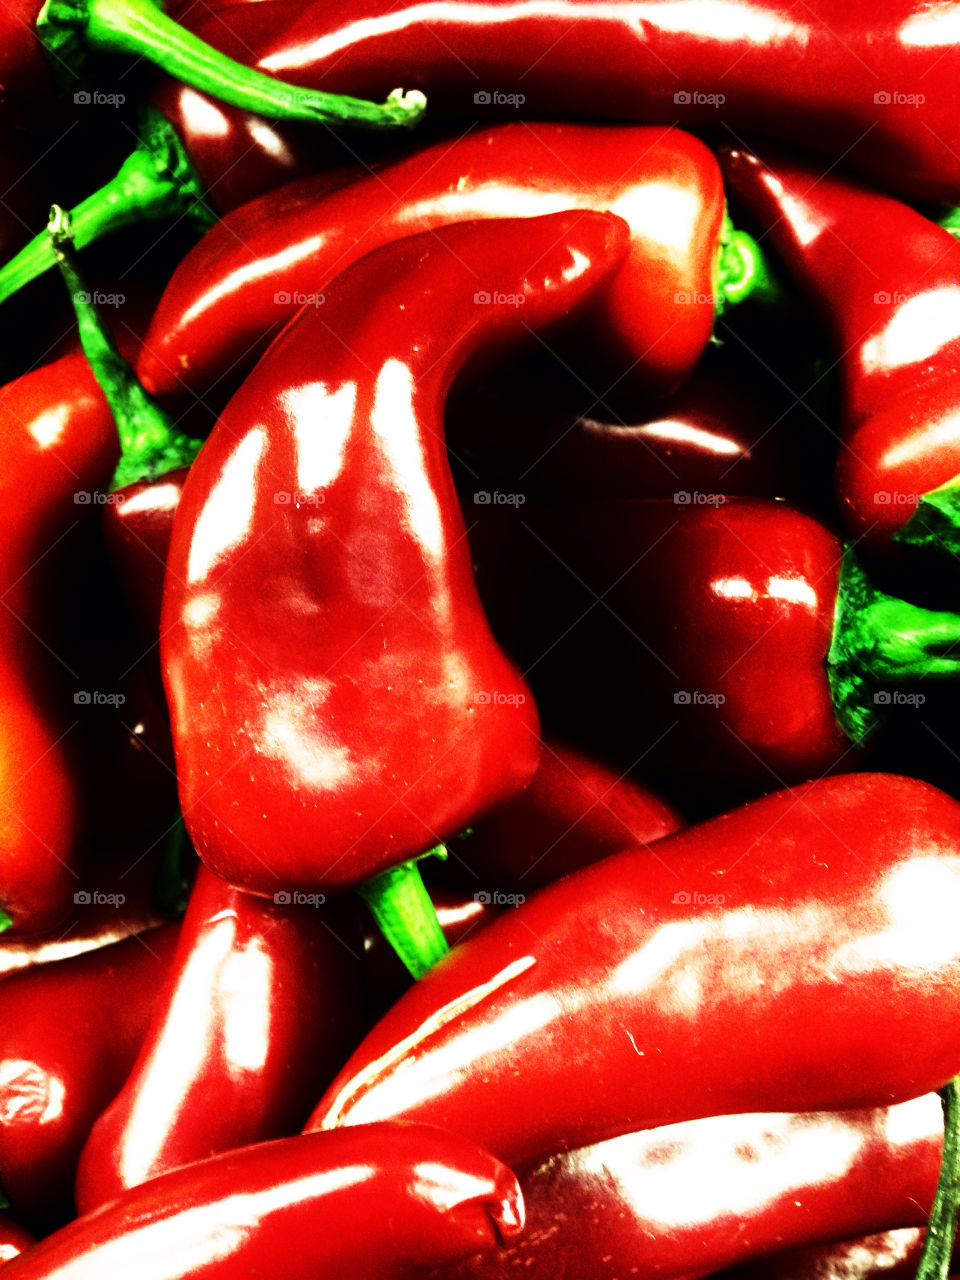 Shiny red spicy jalapeño peppers